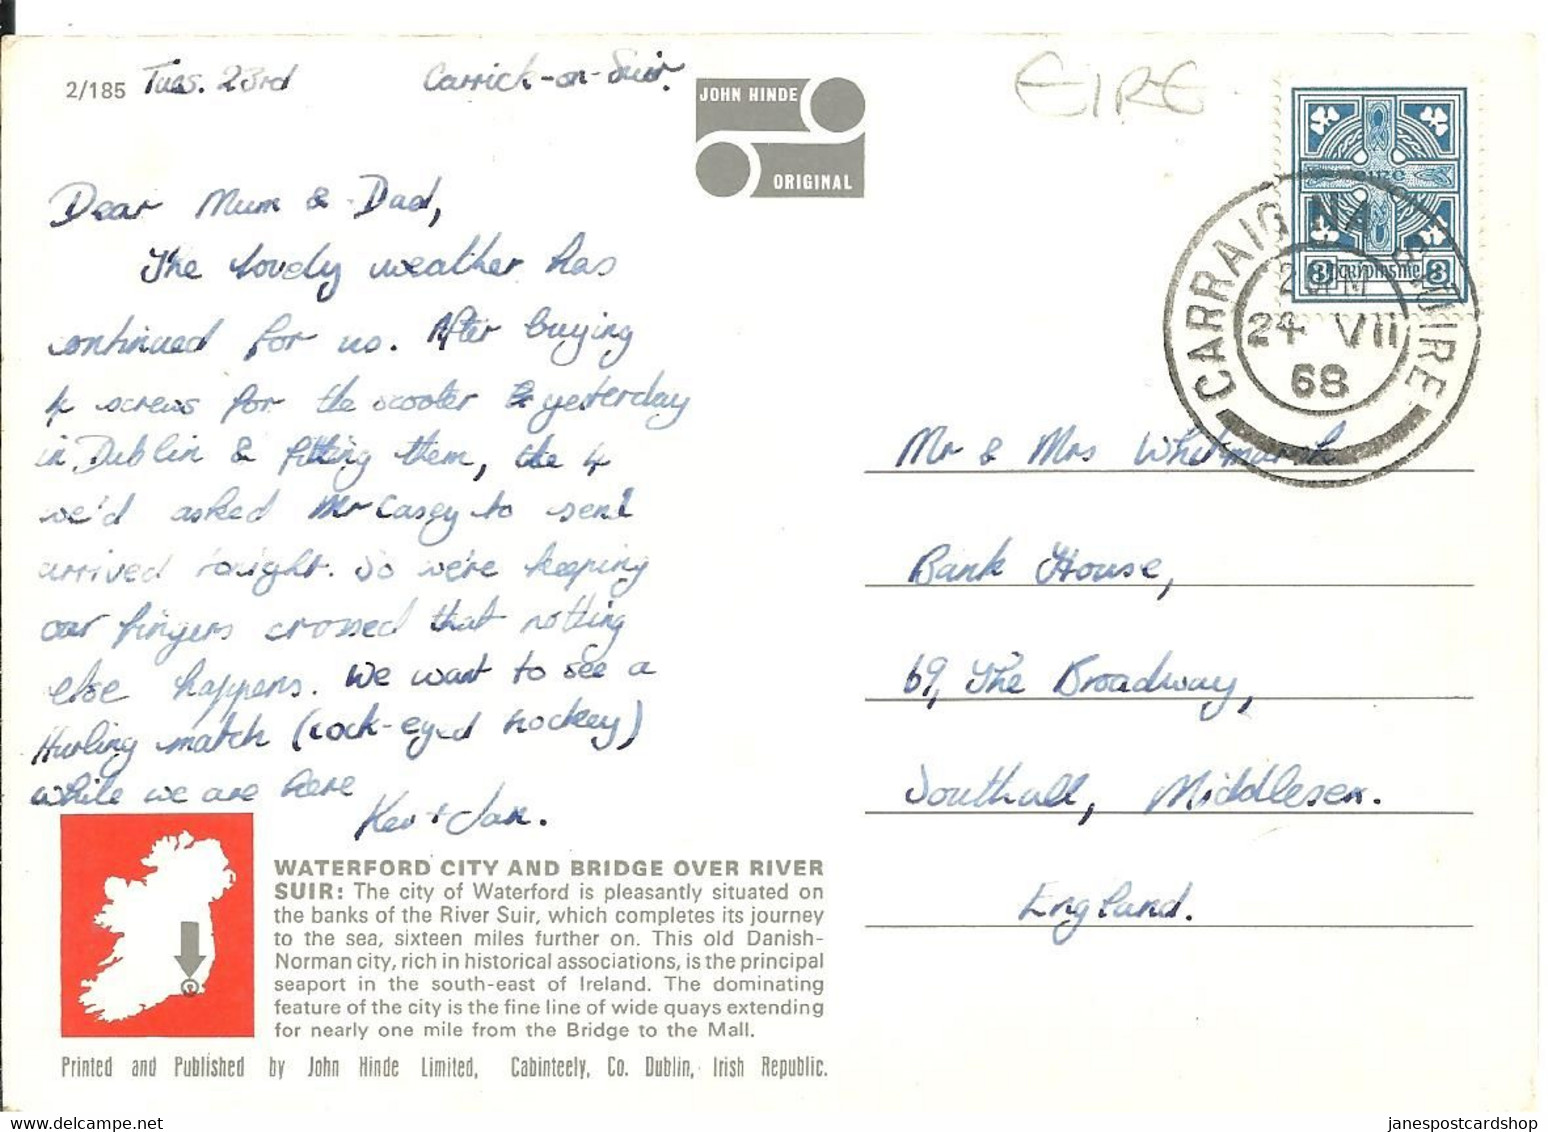 WATERFORD CITY AND BRIDGE OVER RIVER SUIR - IRELAND - GOOD CARRIG NA SUIRE POSTMARK - 1968  - MODERN SIZED CARD - Waterford